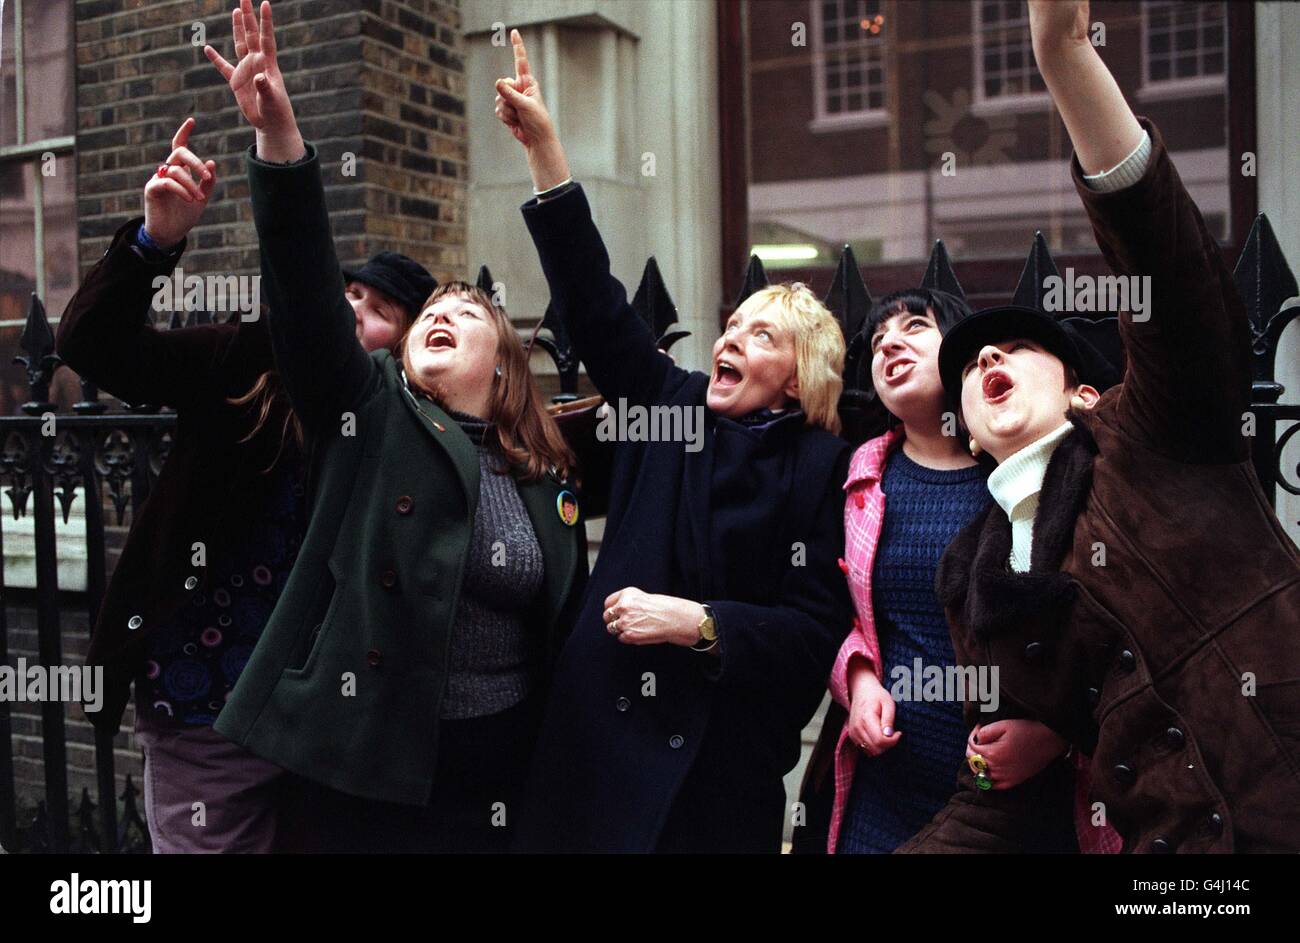 Screaming Beatles fans look up to the roof of the former Apple HQ in Savile Row, London, where the Bootleg Beatles tribute group where re-enacting the original set played by the Beatles in the 1970s. Stock Photo